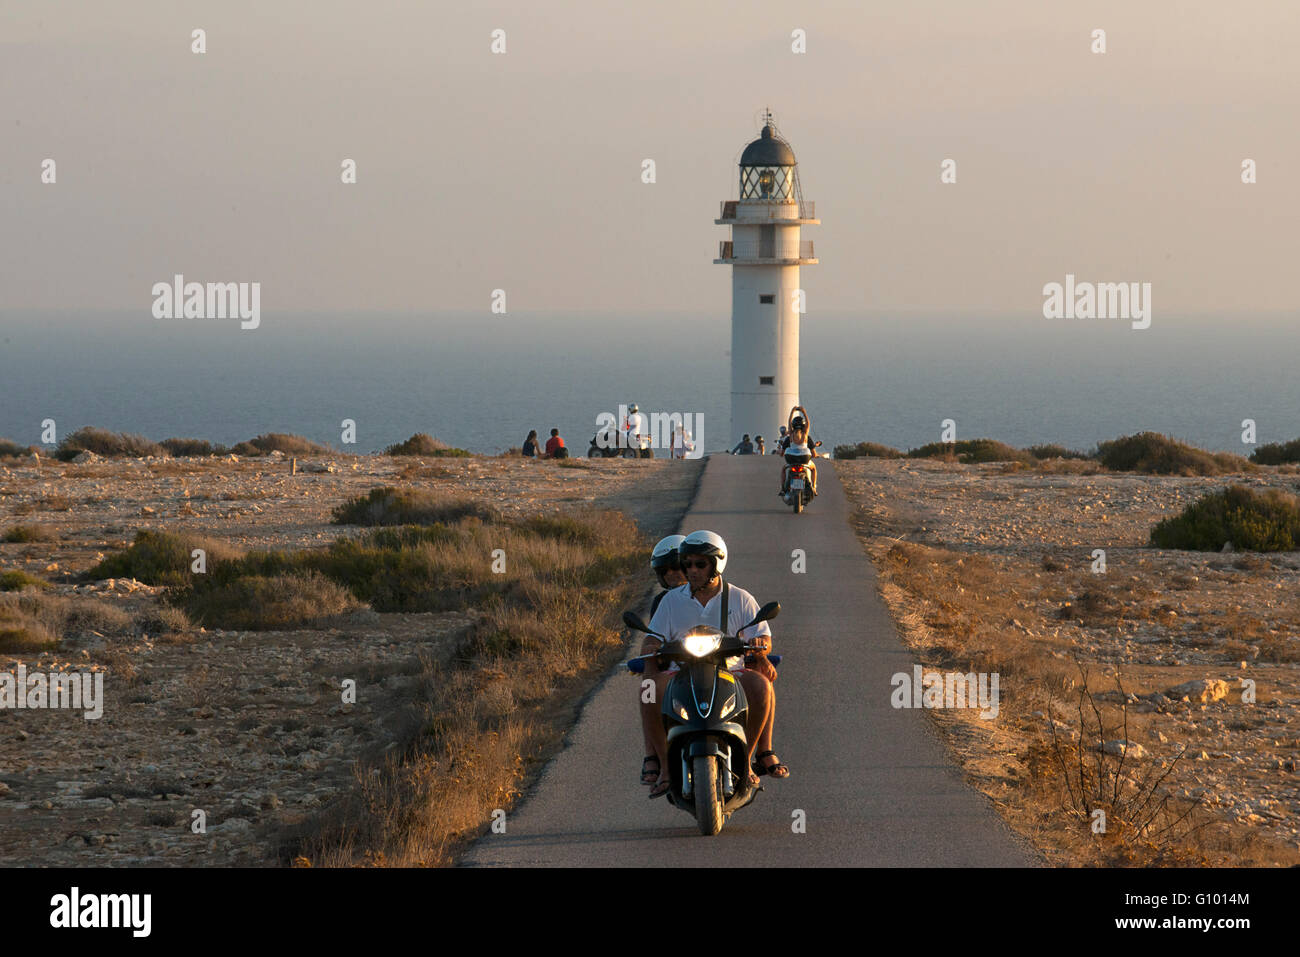 Two young motorcyclists on a long road to Es Cap de Barbaria lighthouse, in Formentera, Balears Islands. Spain. Barbaria cape formentera lighthouse road. Stock Photo